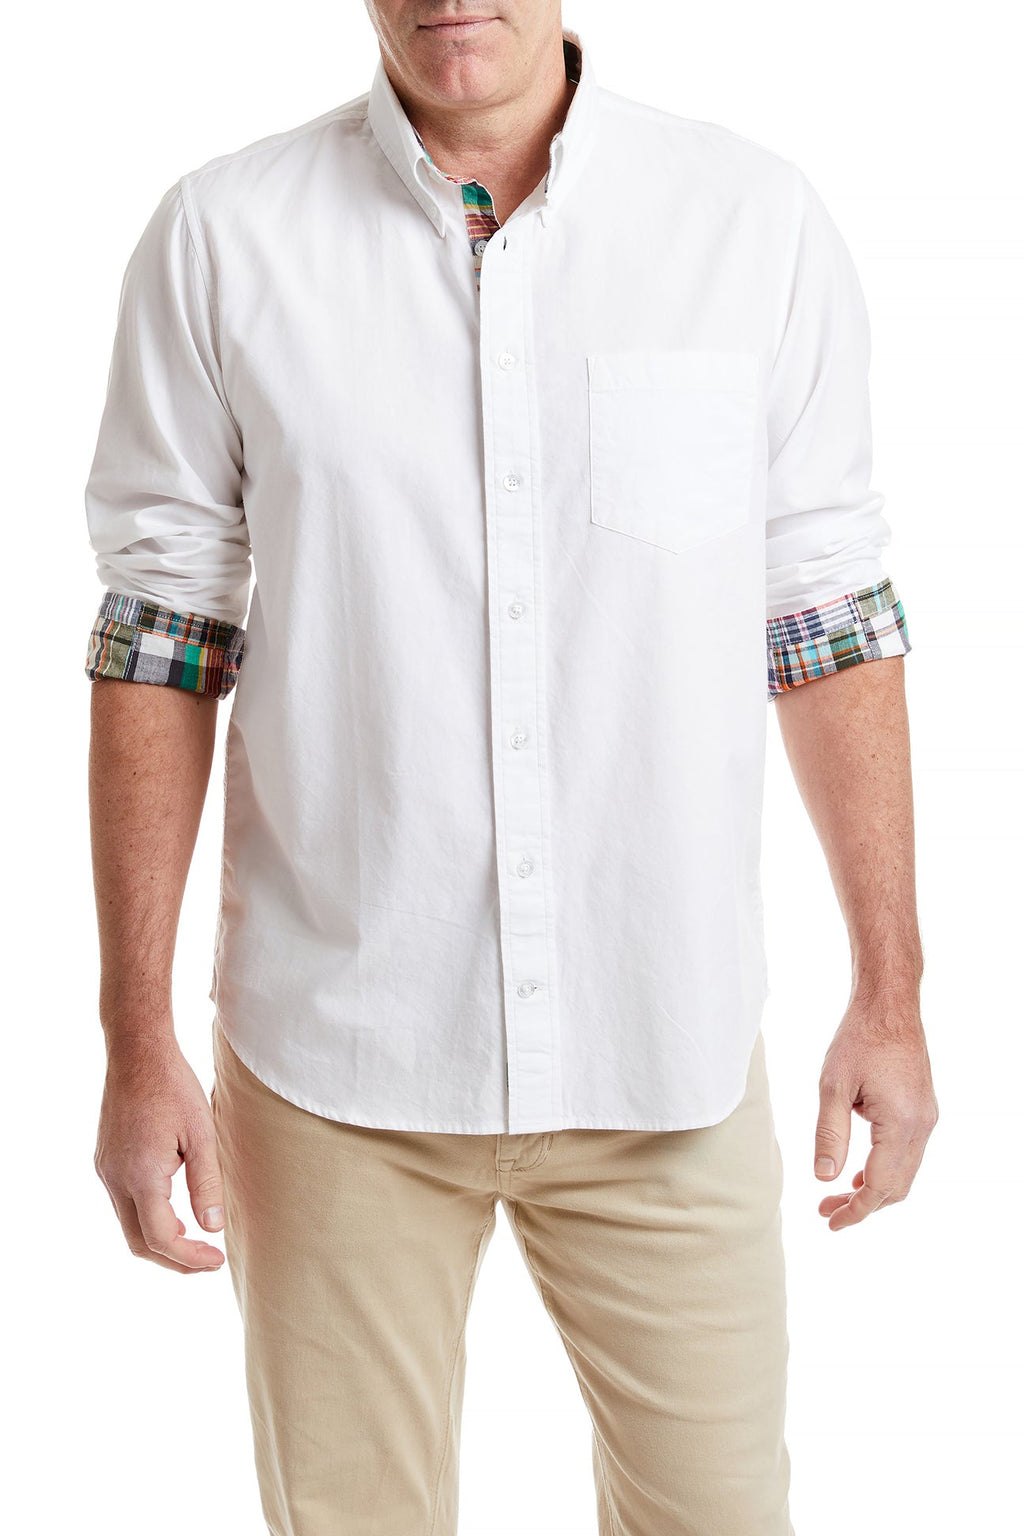 Chase Shirt White Oxford with Osterville Patch Madras MENS SPORT SHIRTS Castaway Nantucket Island